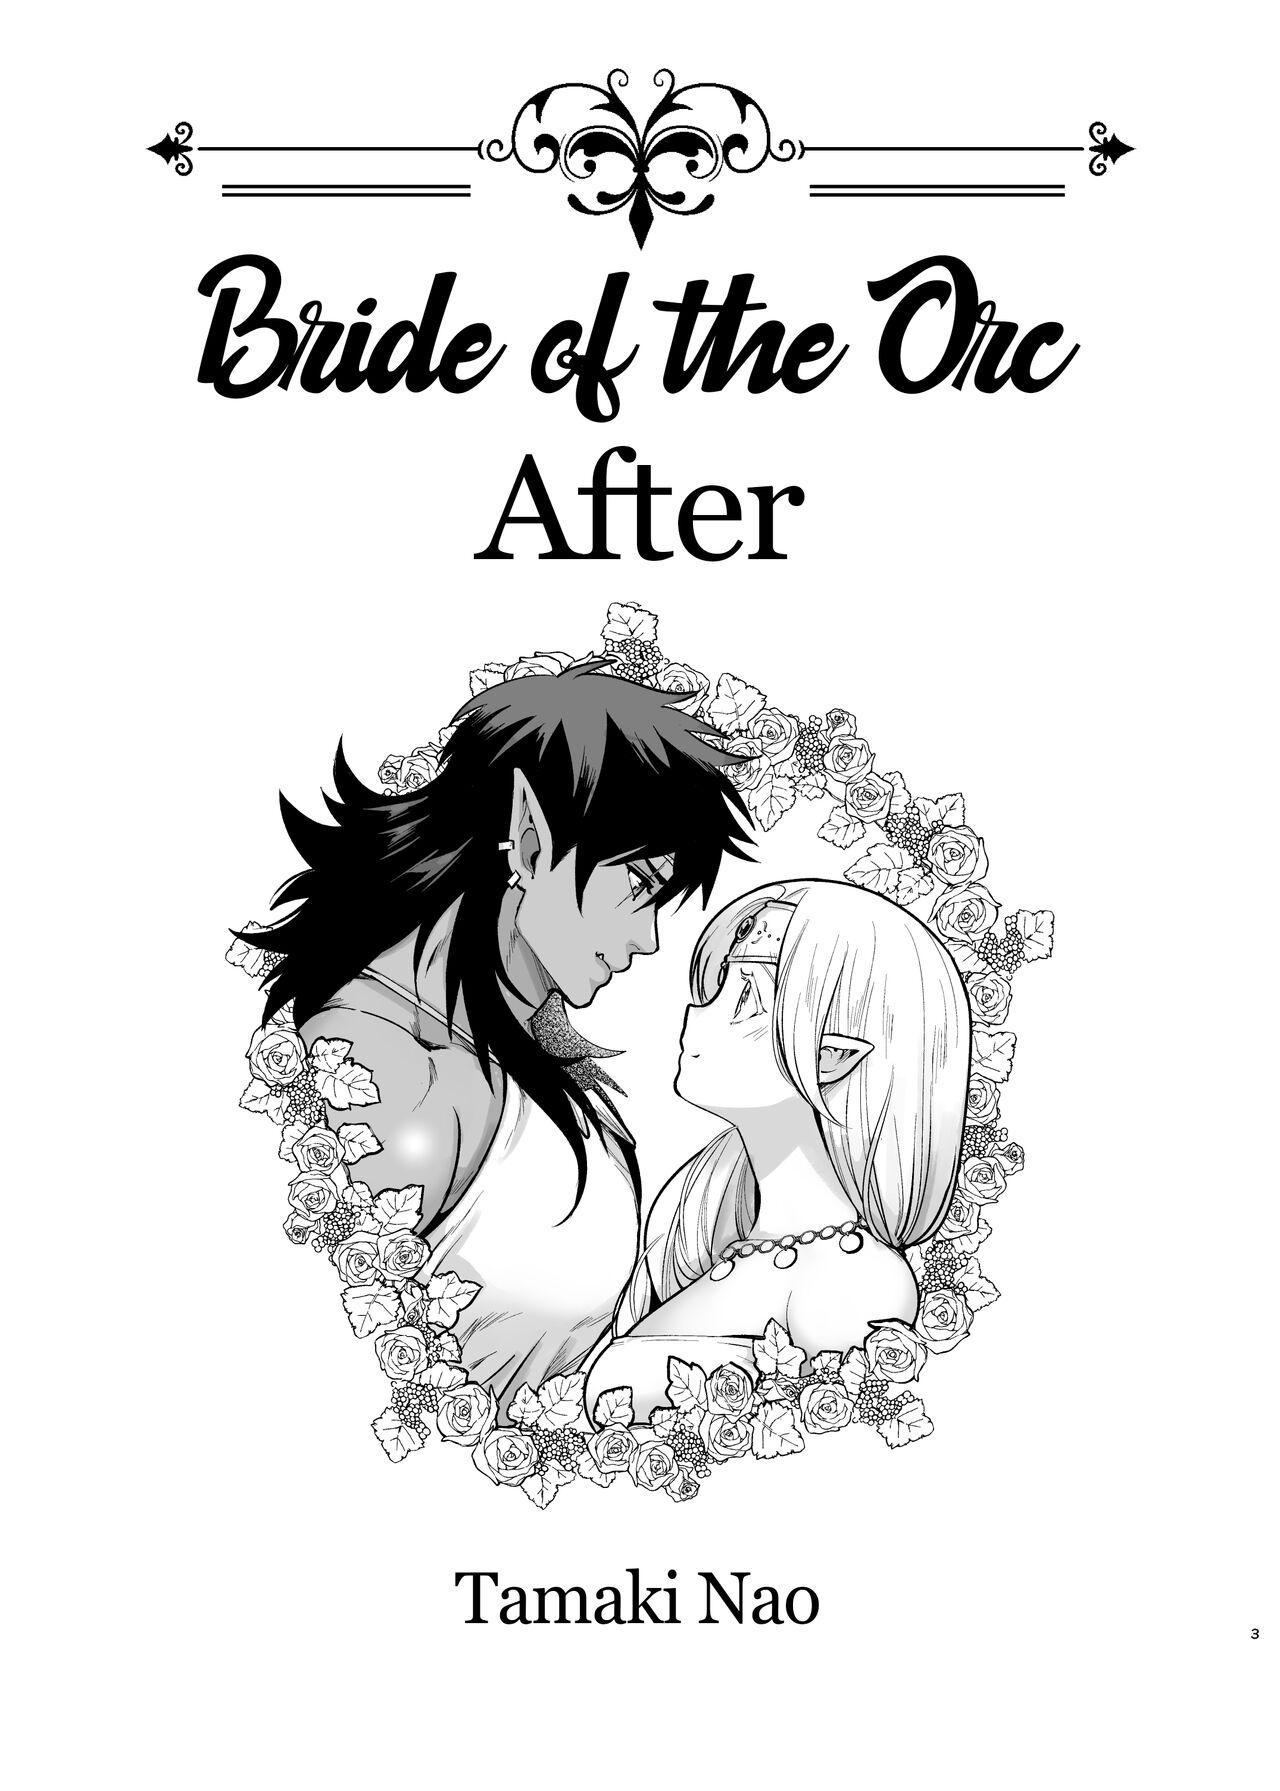 Orc no Hanayome After | Bride of the Orc After 2